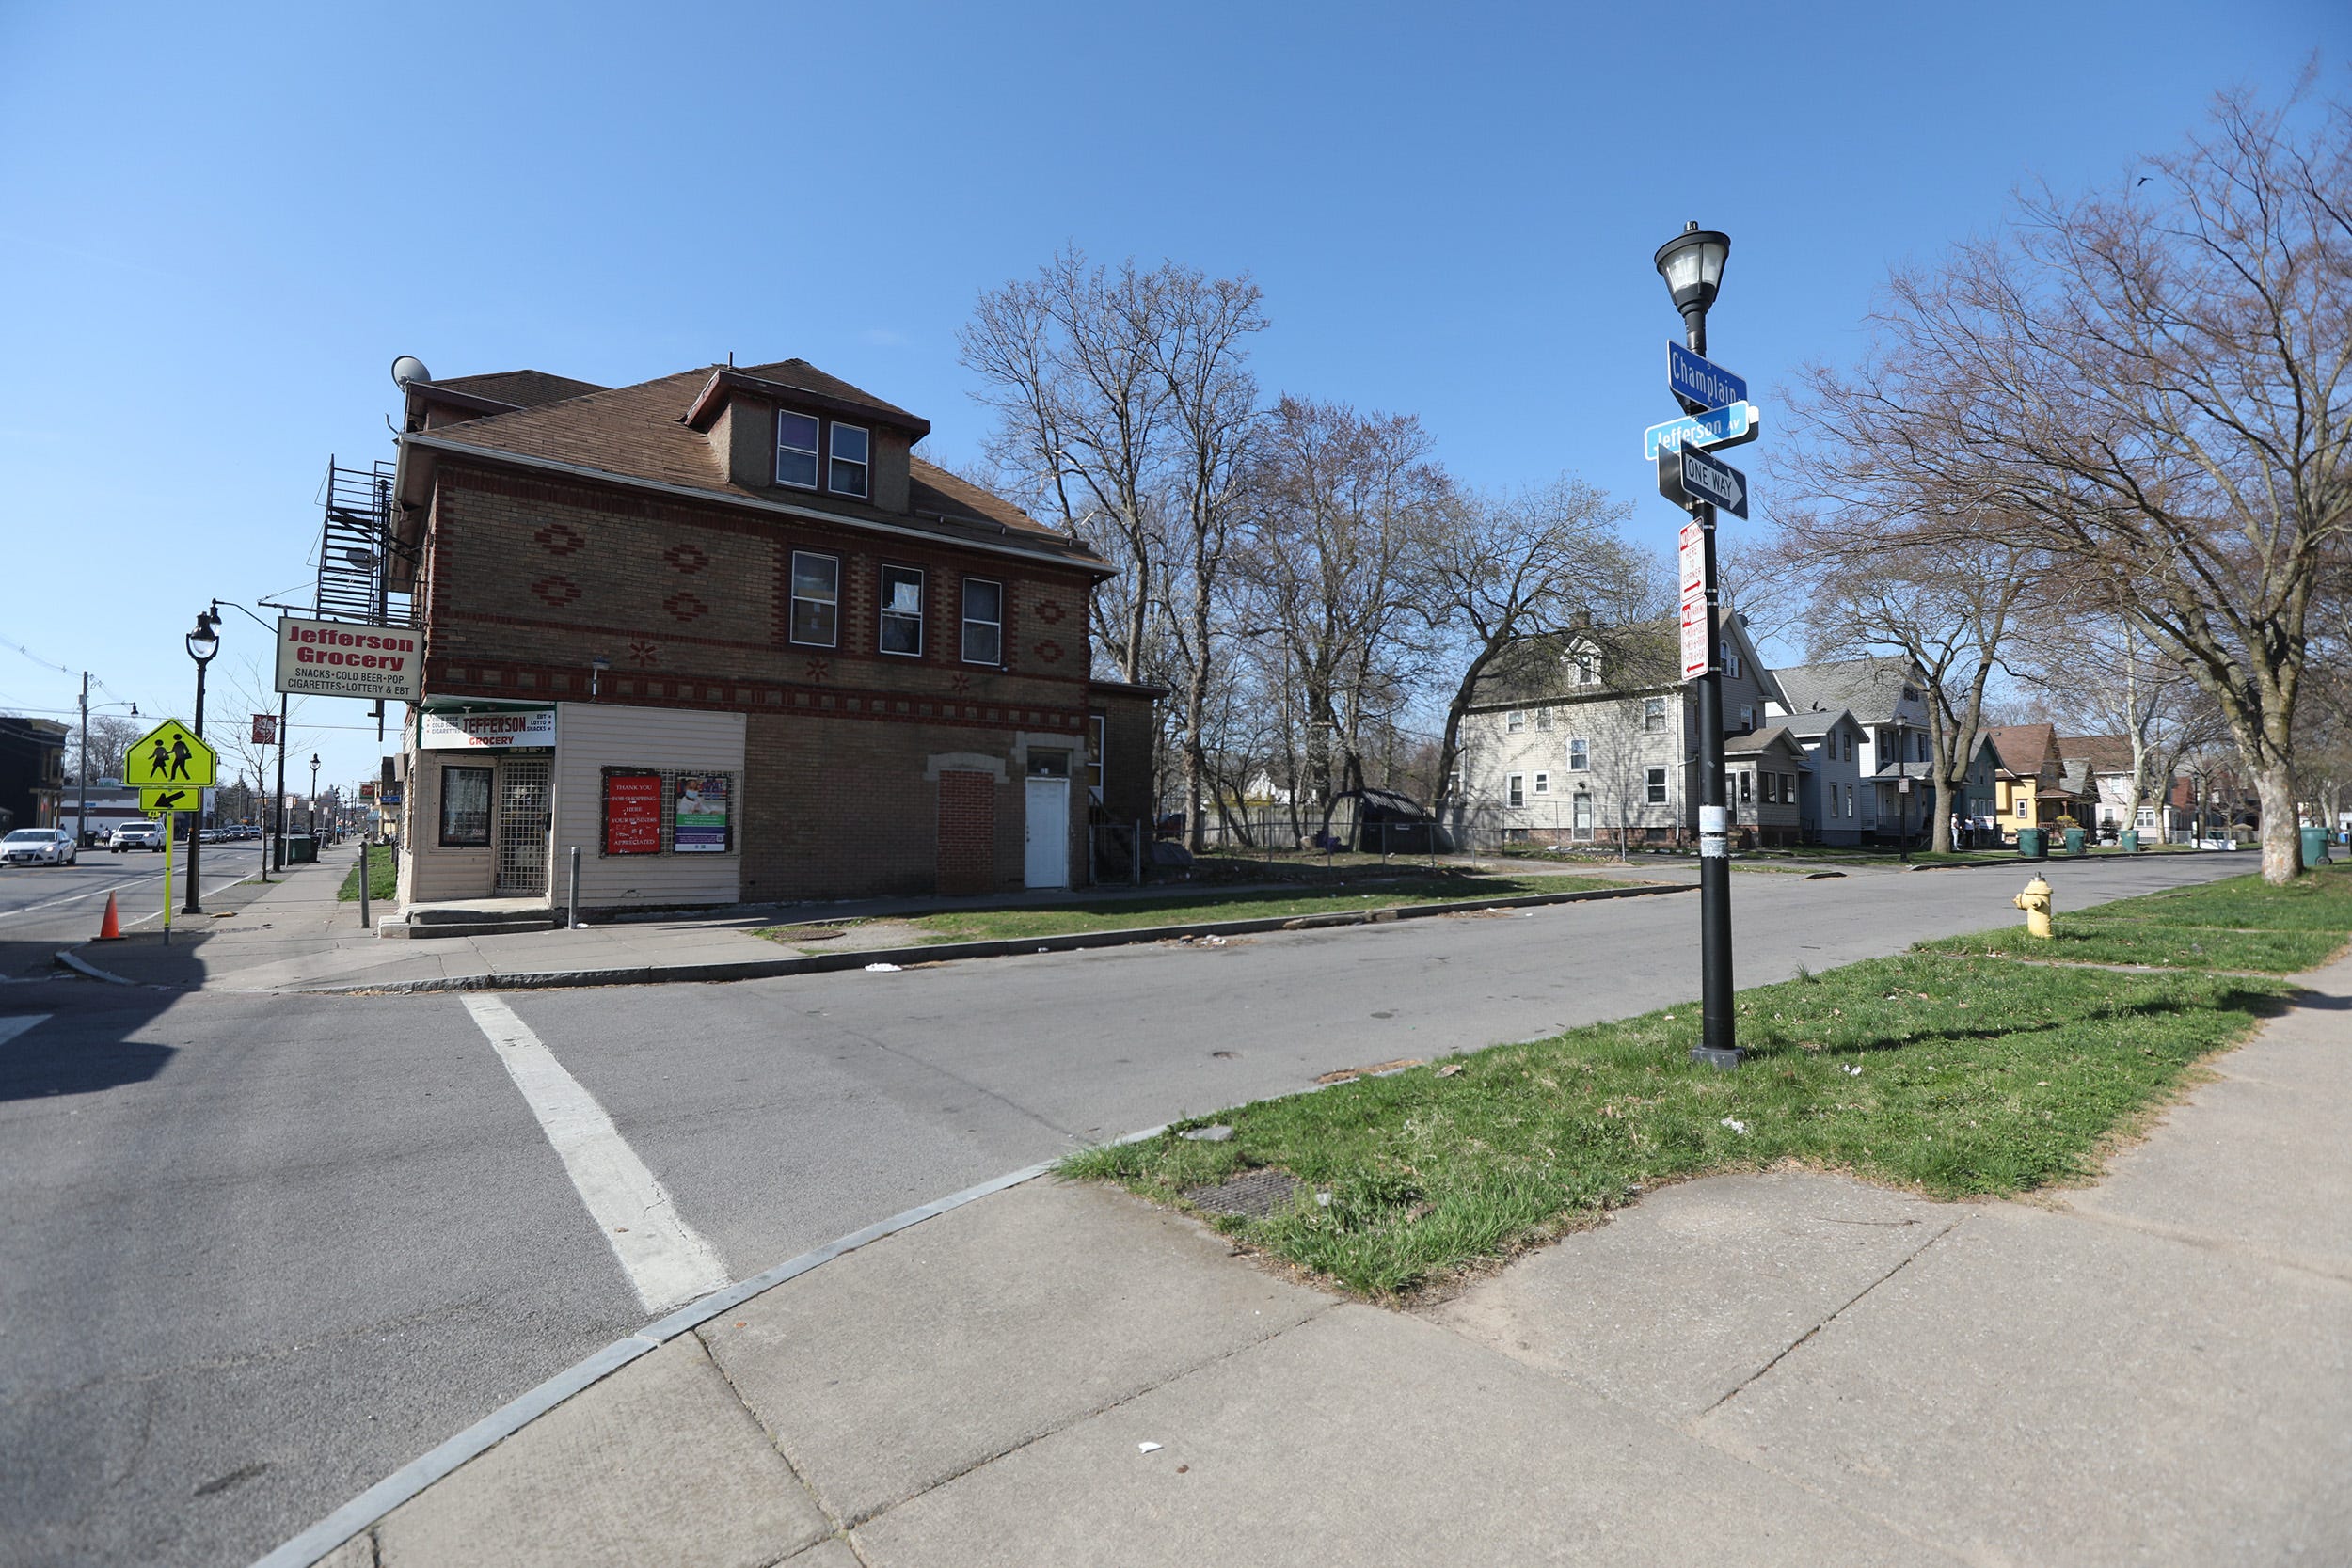 The corner of Champlain Street and Jefferson Avenue today, just four houses away from where Domonique Holley-Grisham went missing in 2009.